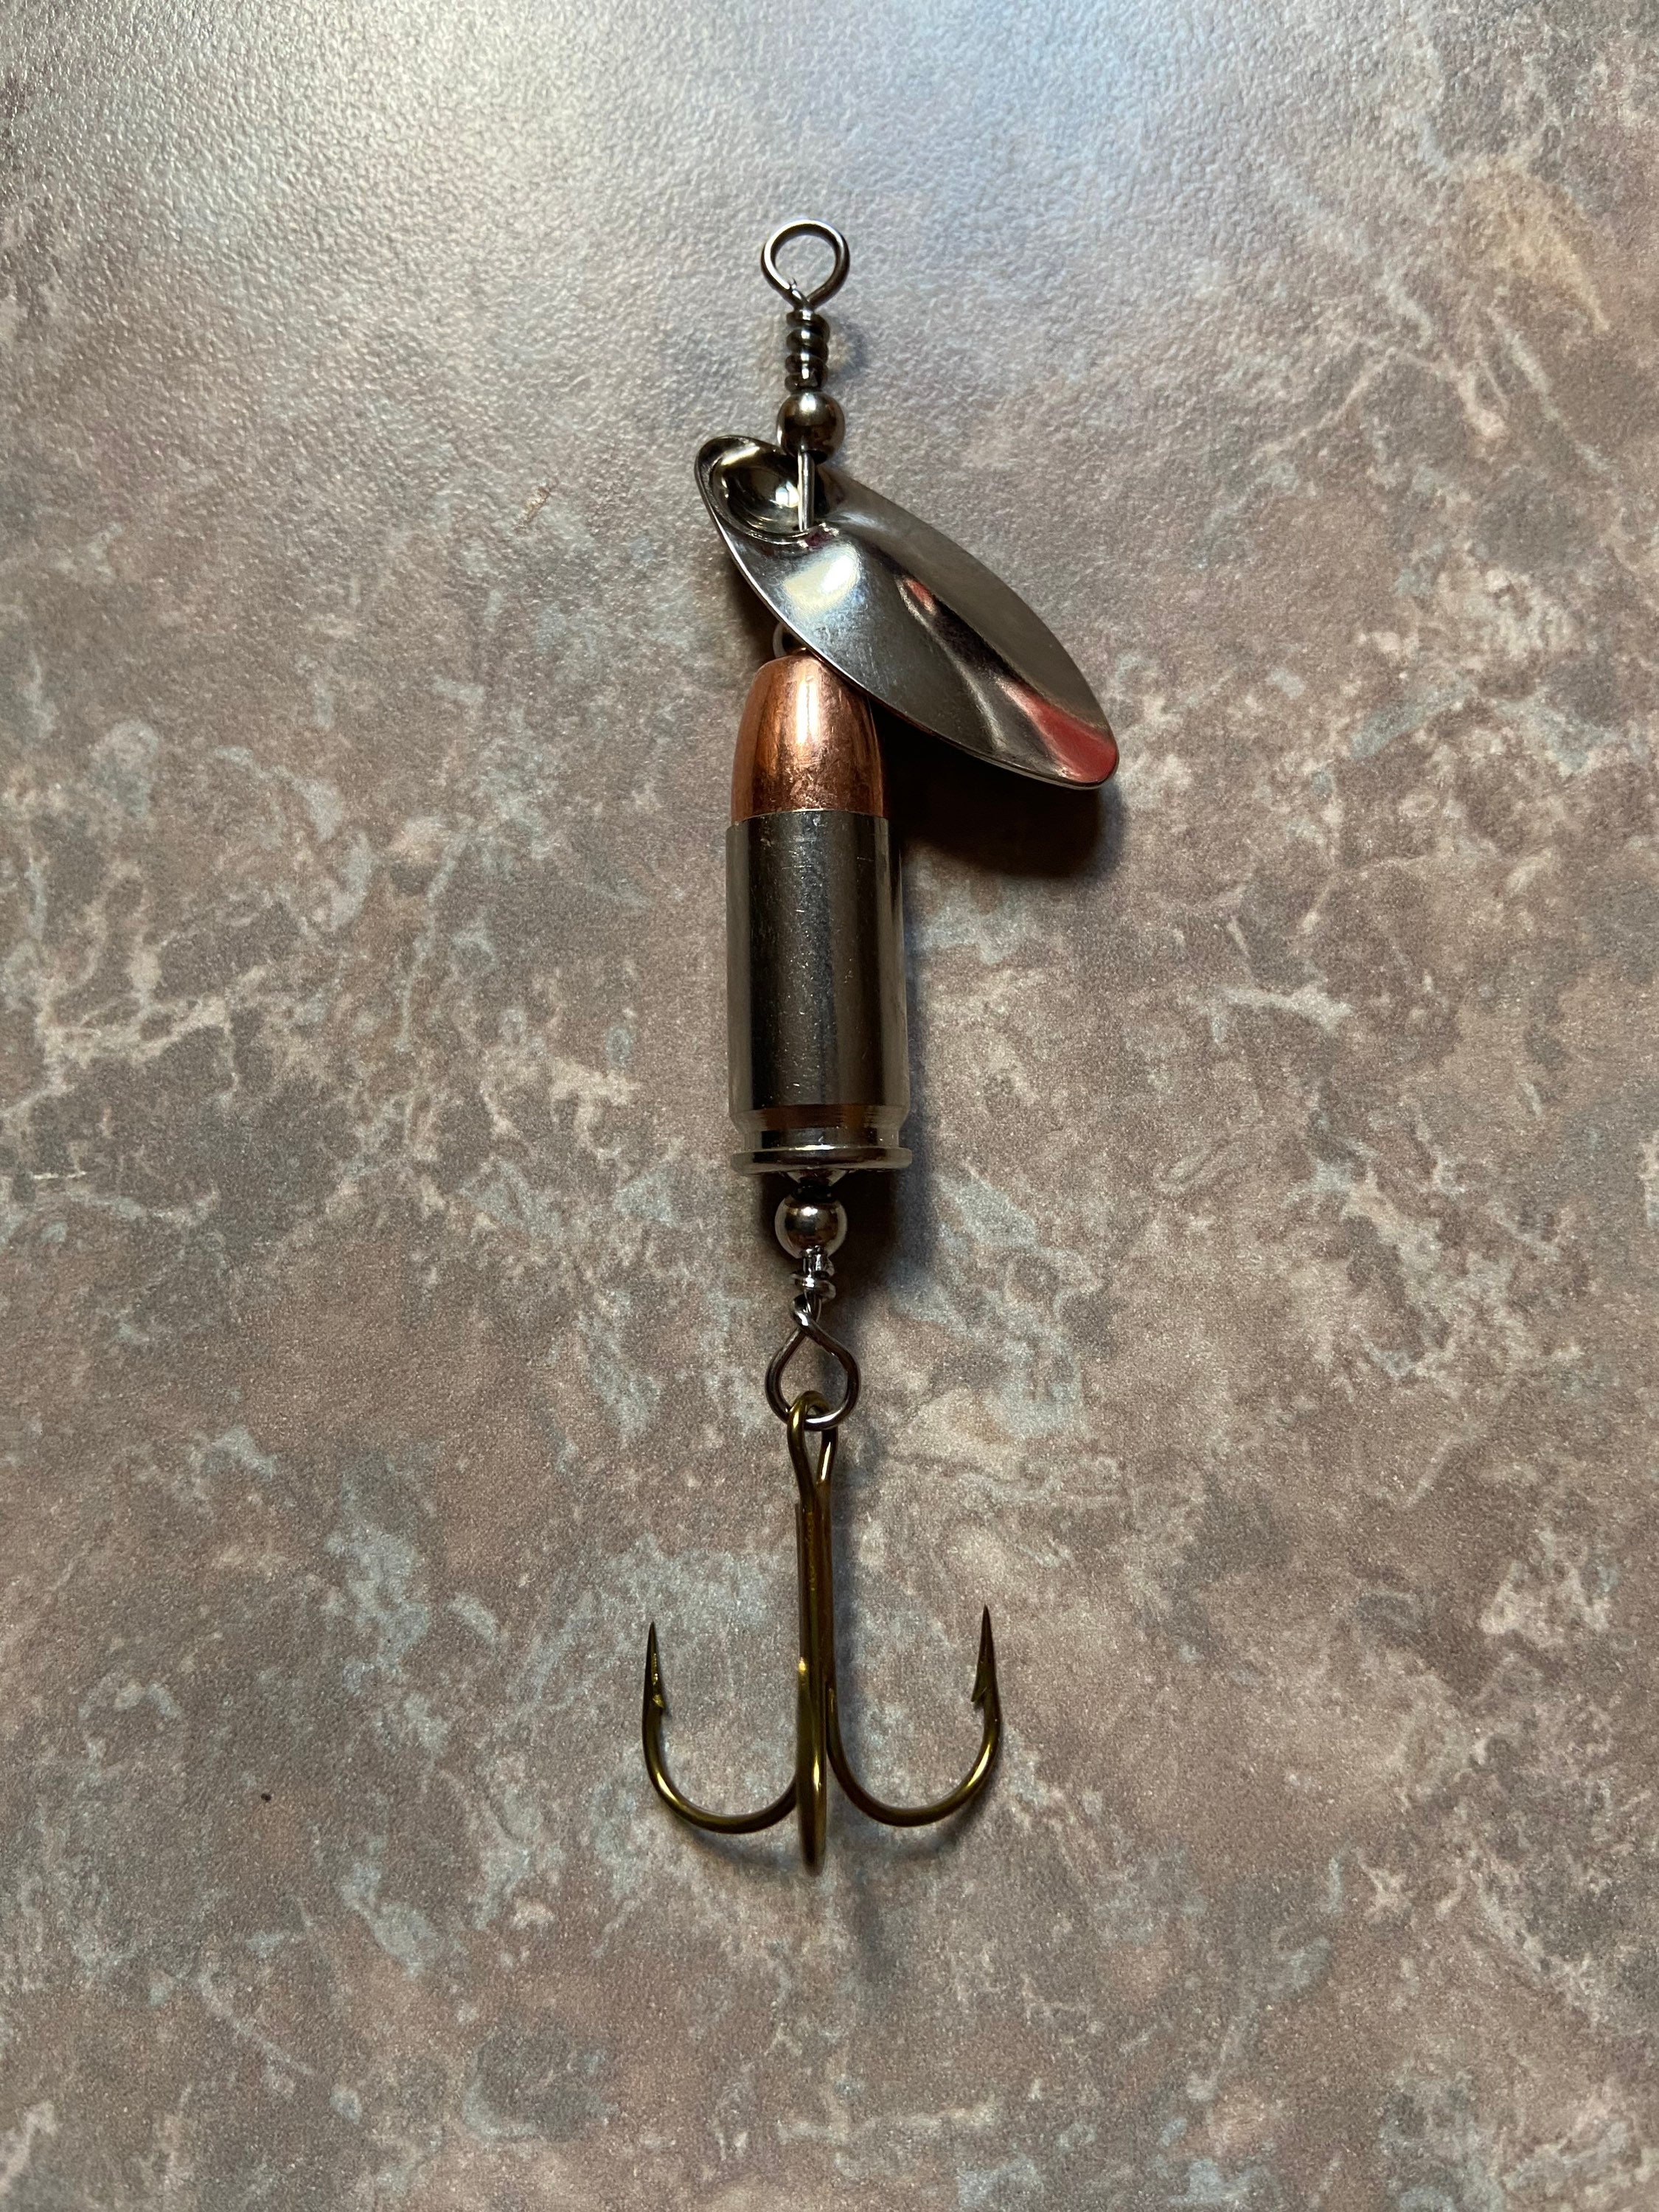 22 Inline Spinner Trout Bullet Lure